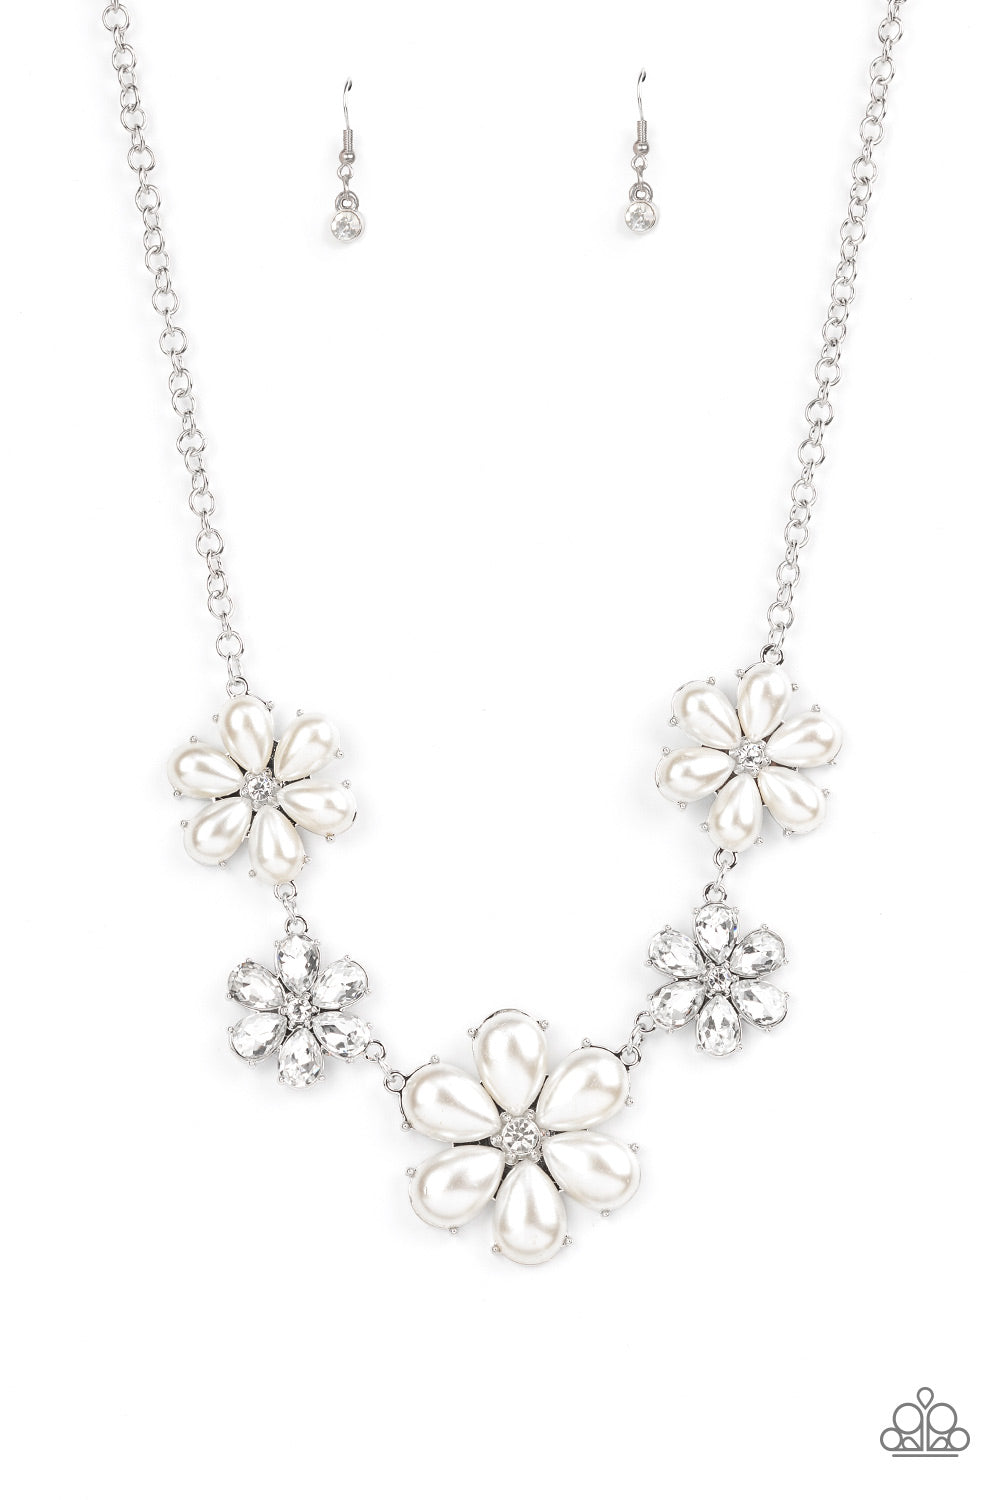 five-dollar-jewelry-fiercely-flowering-white-necklace-paparazzi-accessories